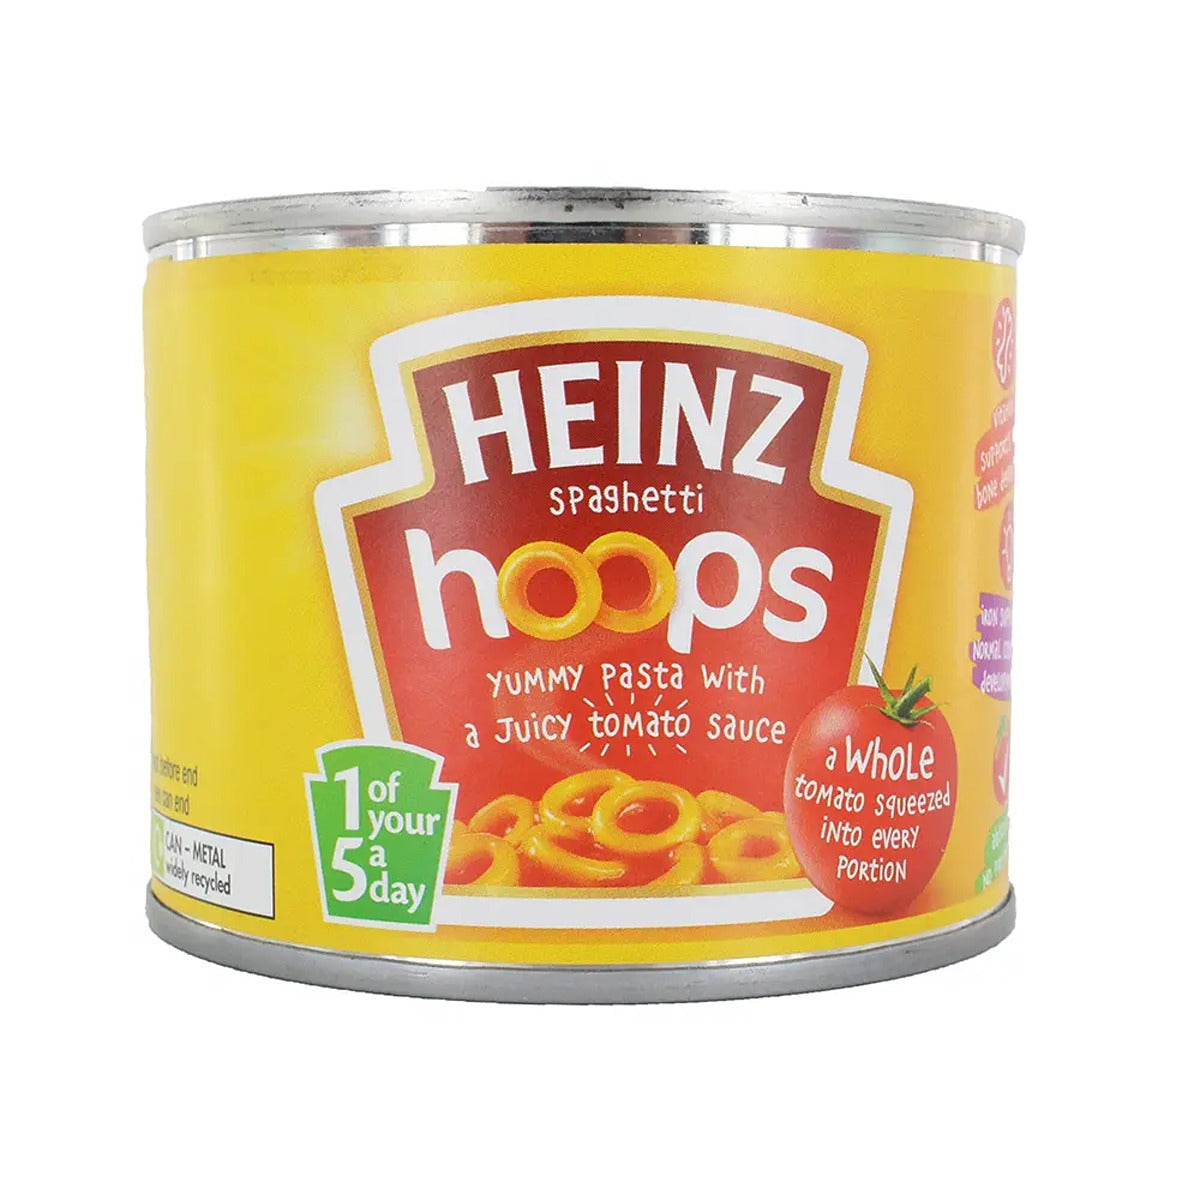 Heinz - Spaghetti Hoops in Tomato Sauce - 215g - Continental Food Store